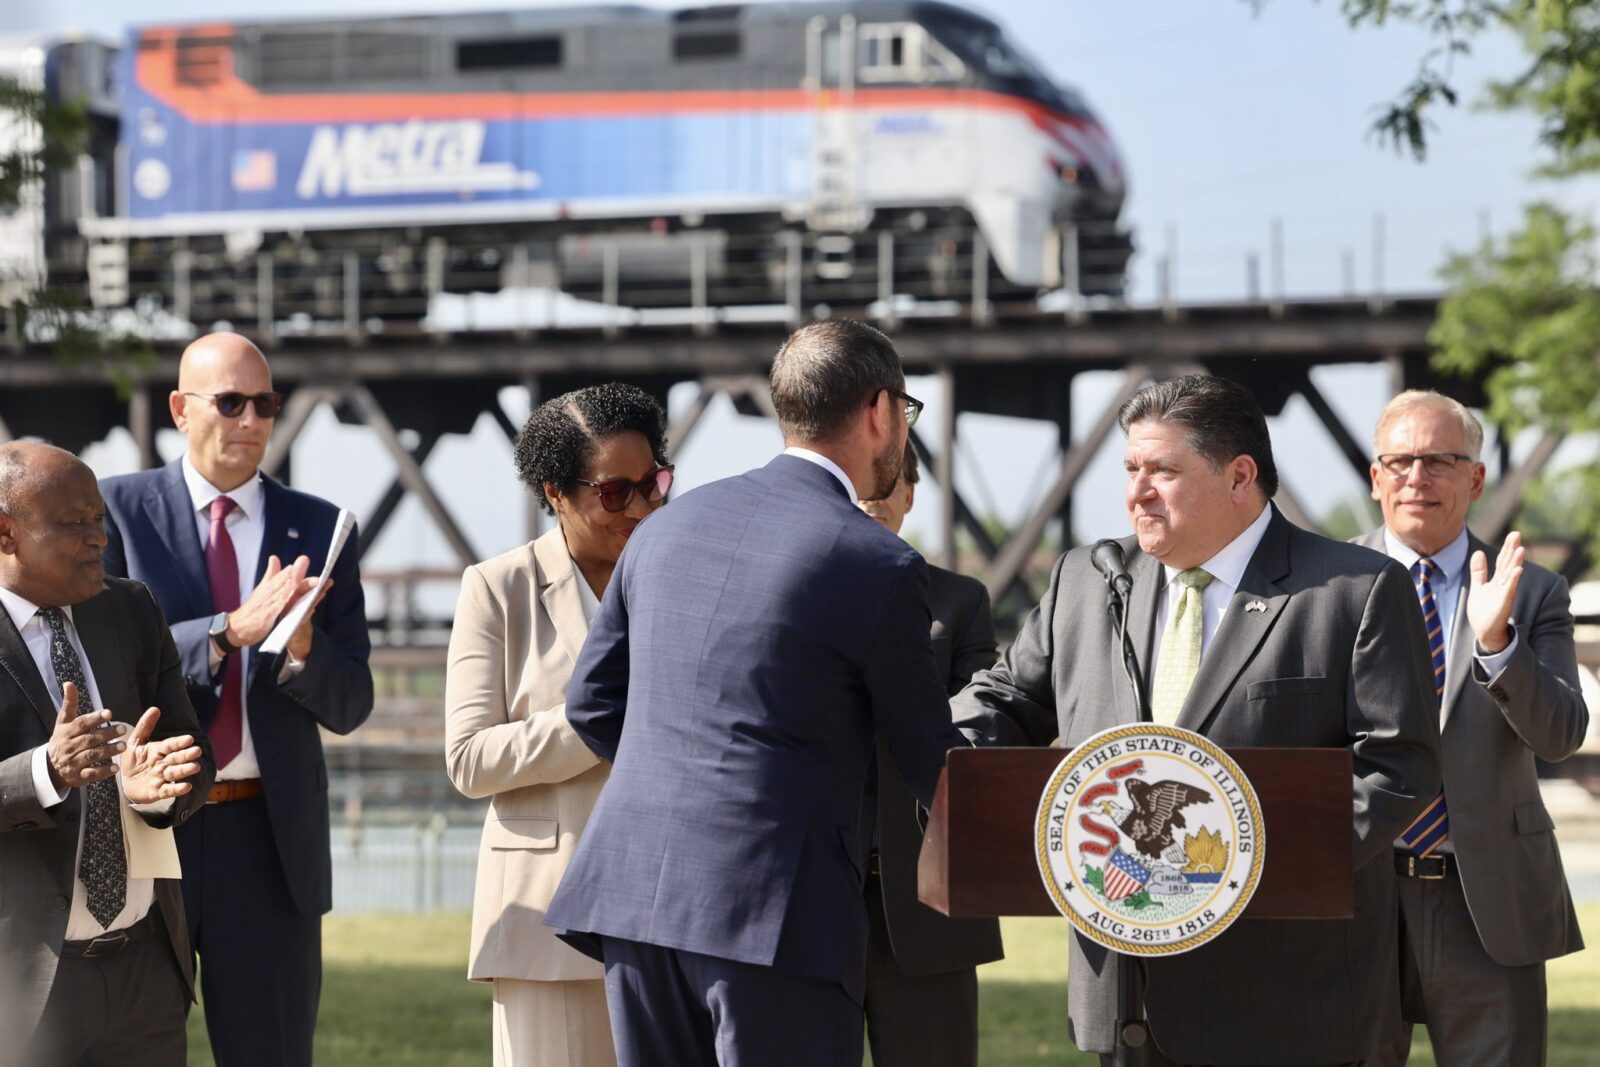 Gov. Pritzker announces that Metra will serve Rockford at a press conference with a Metra locomotive visible on a bridge in the background.